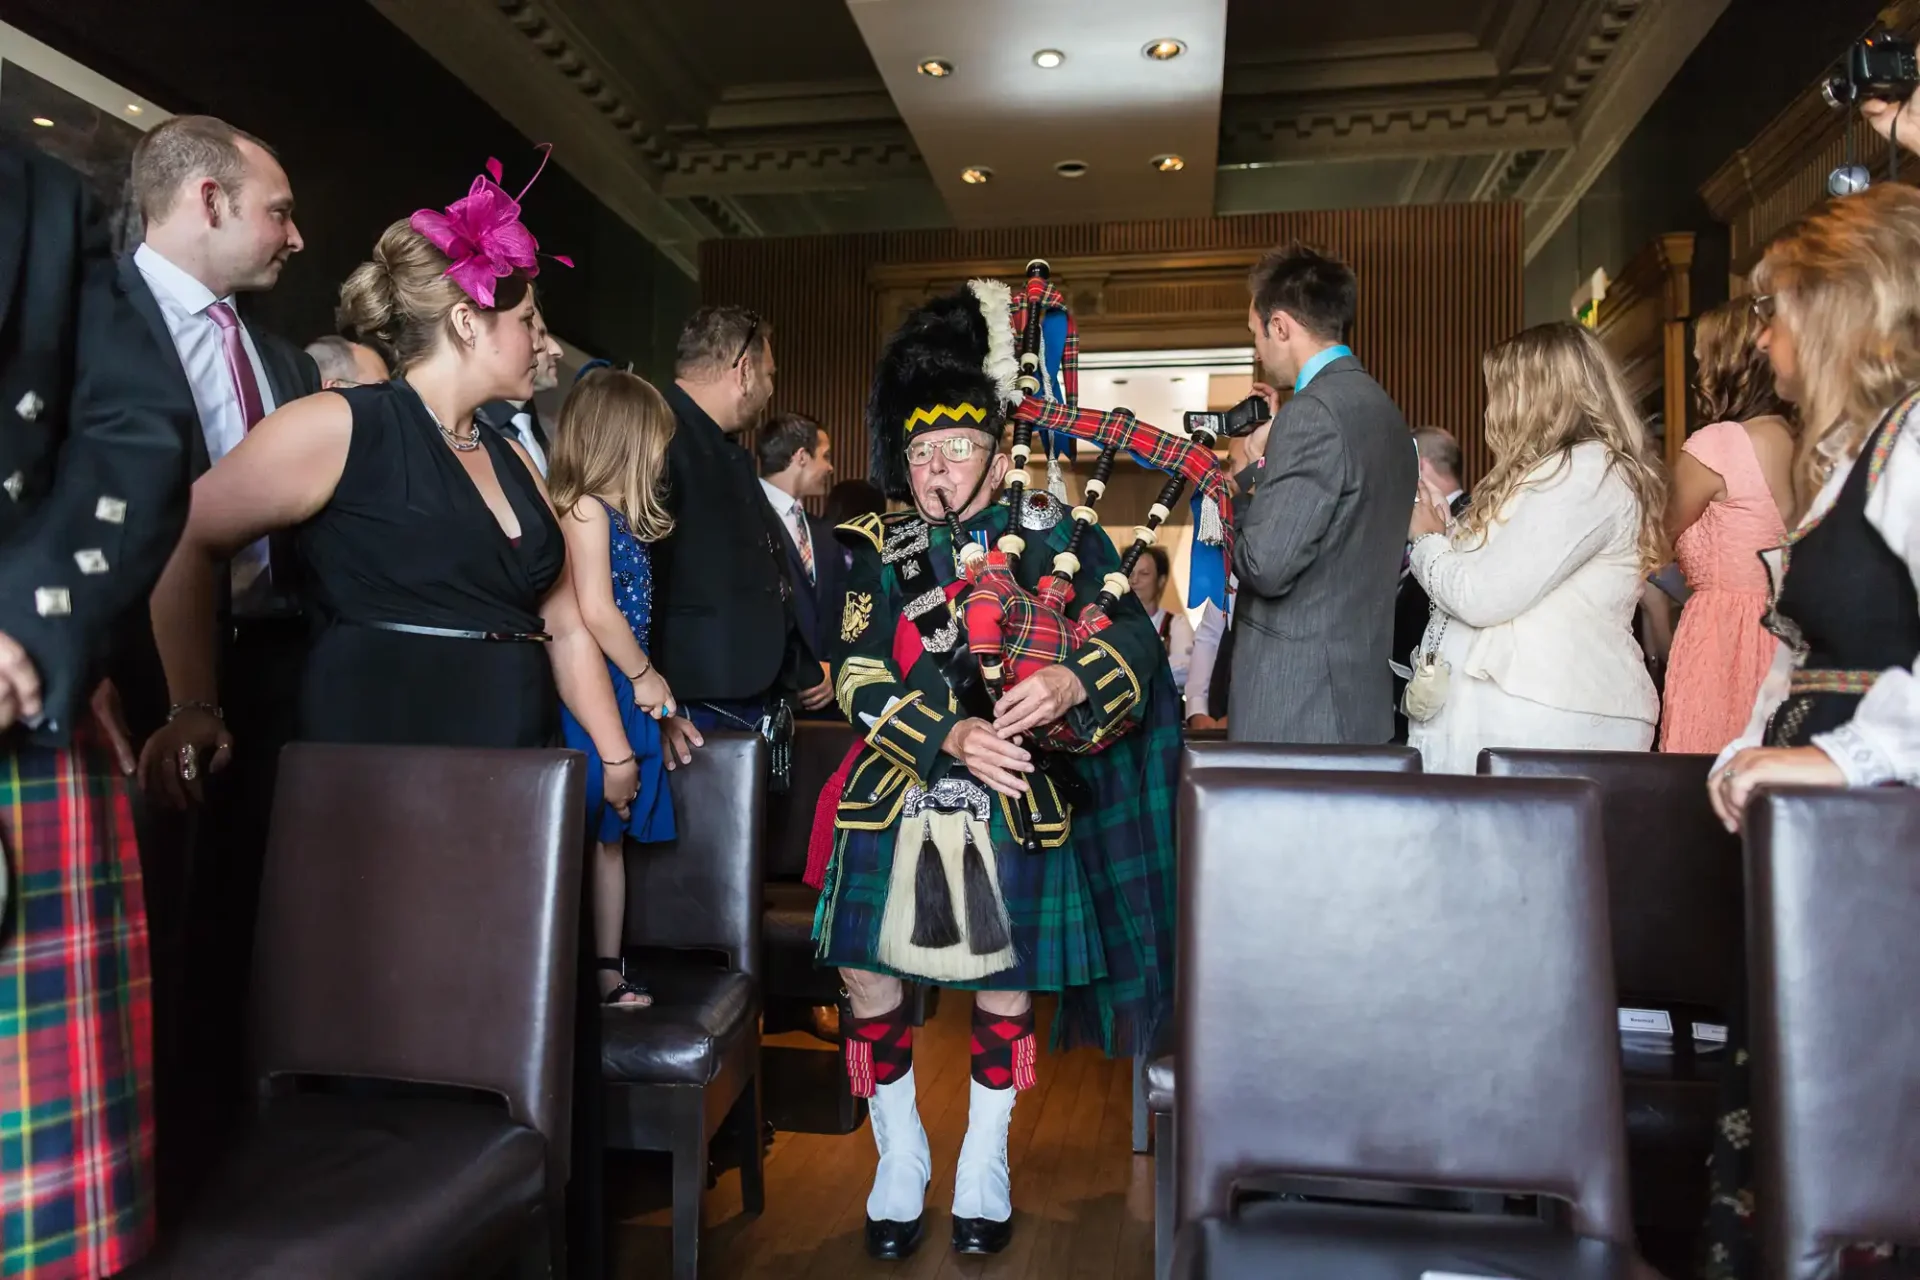 A bagpiper in traditional scottish attire plays inside a bustling room while guests in formal wear listen.